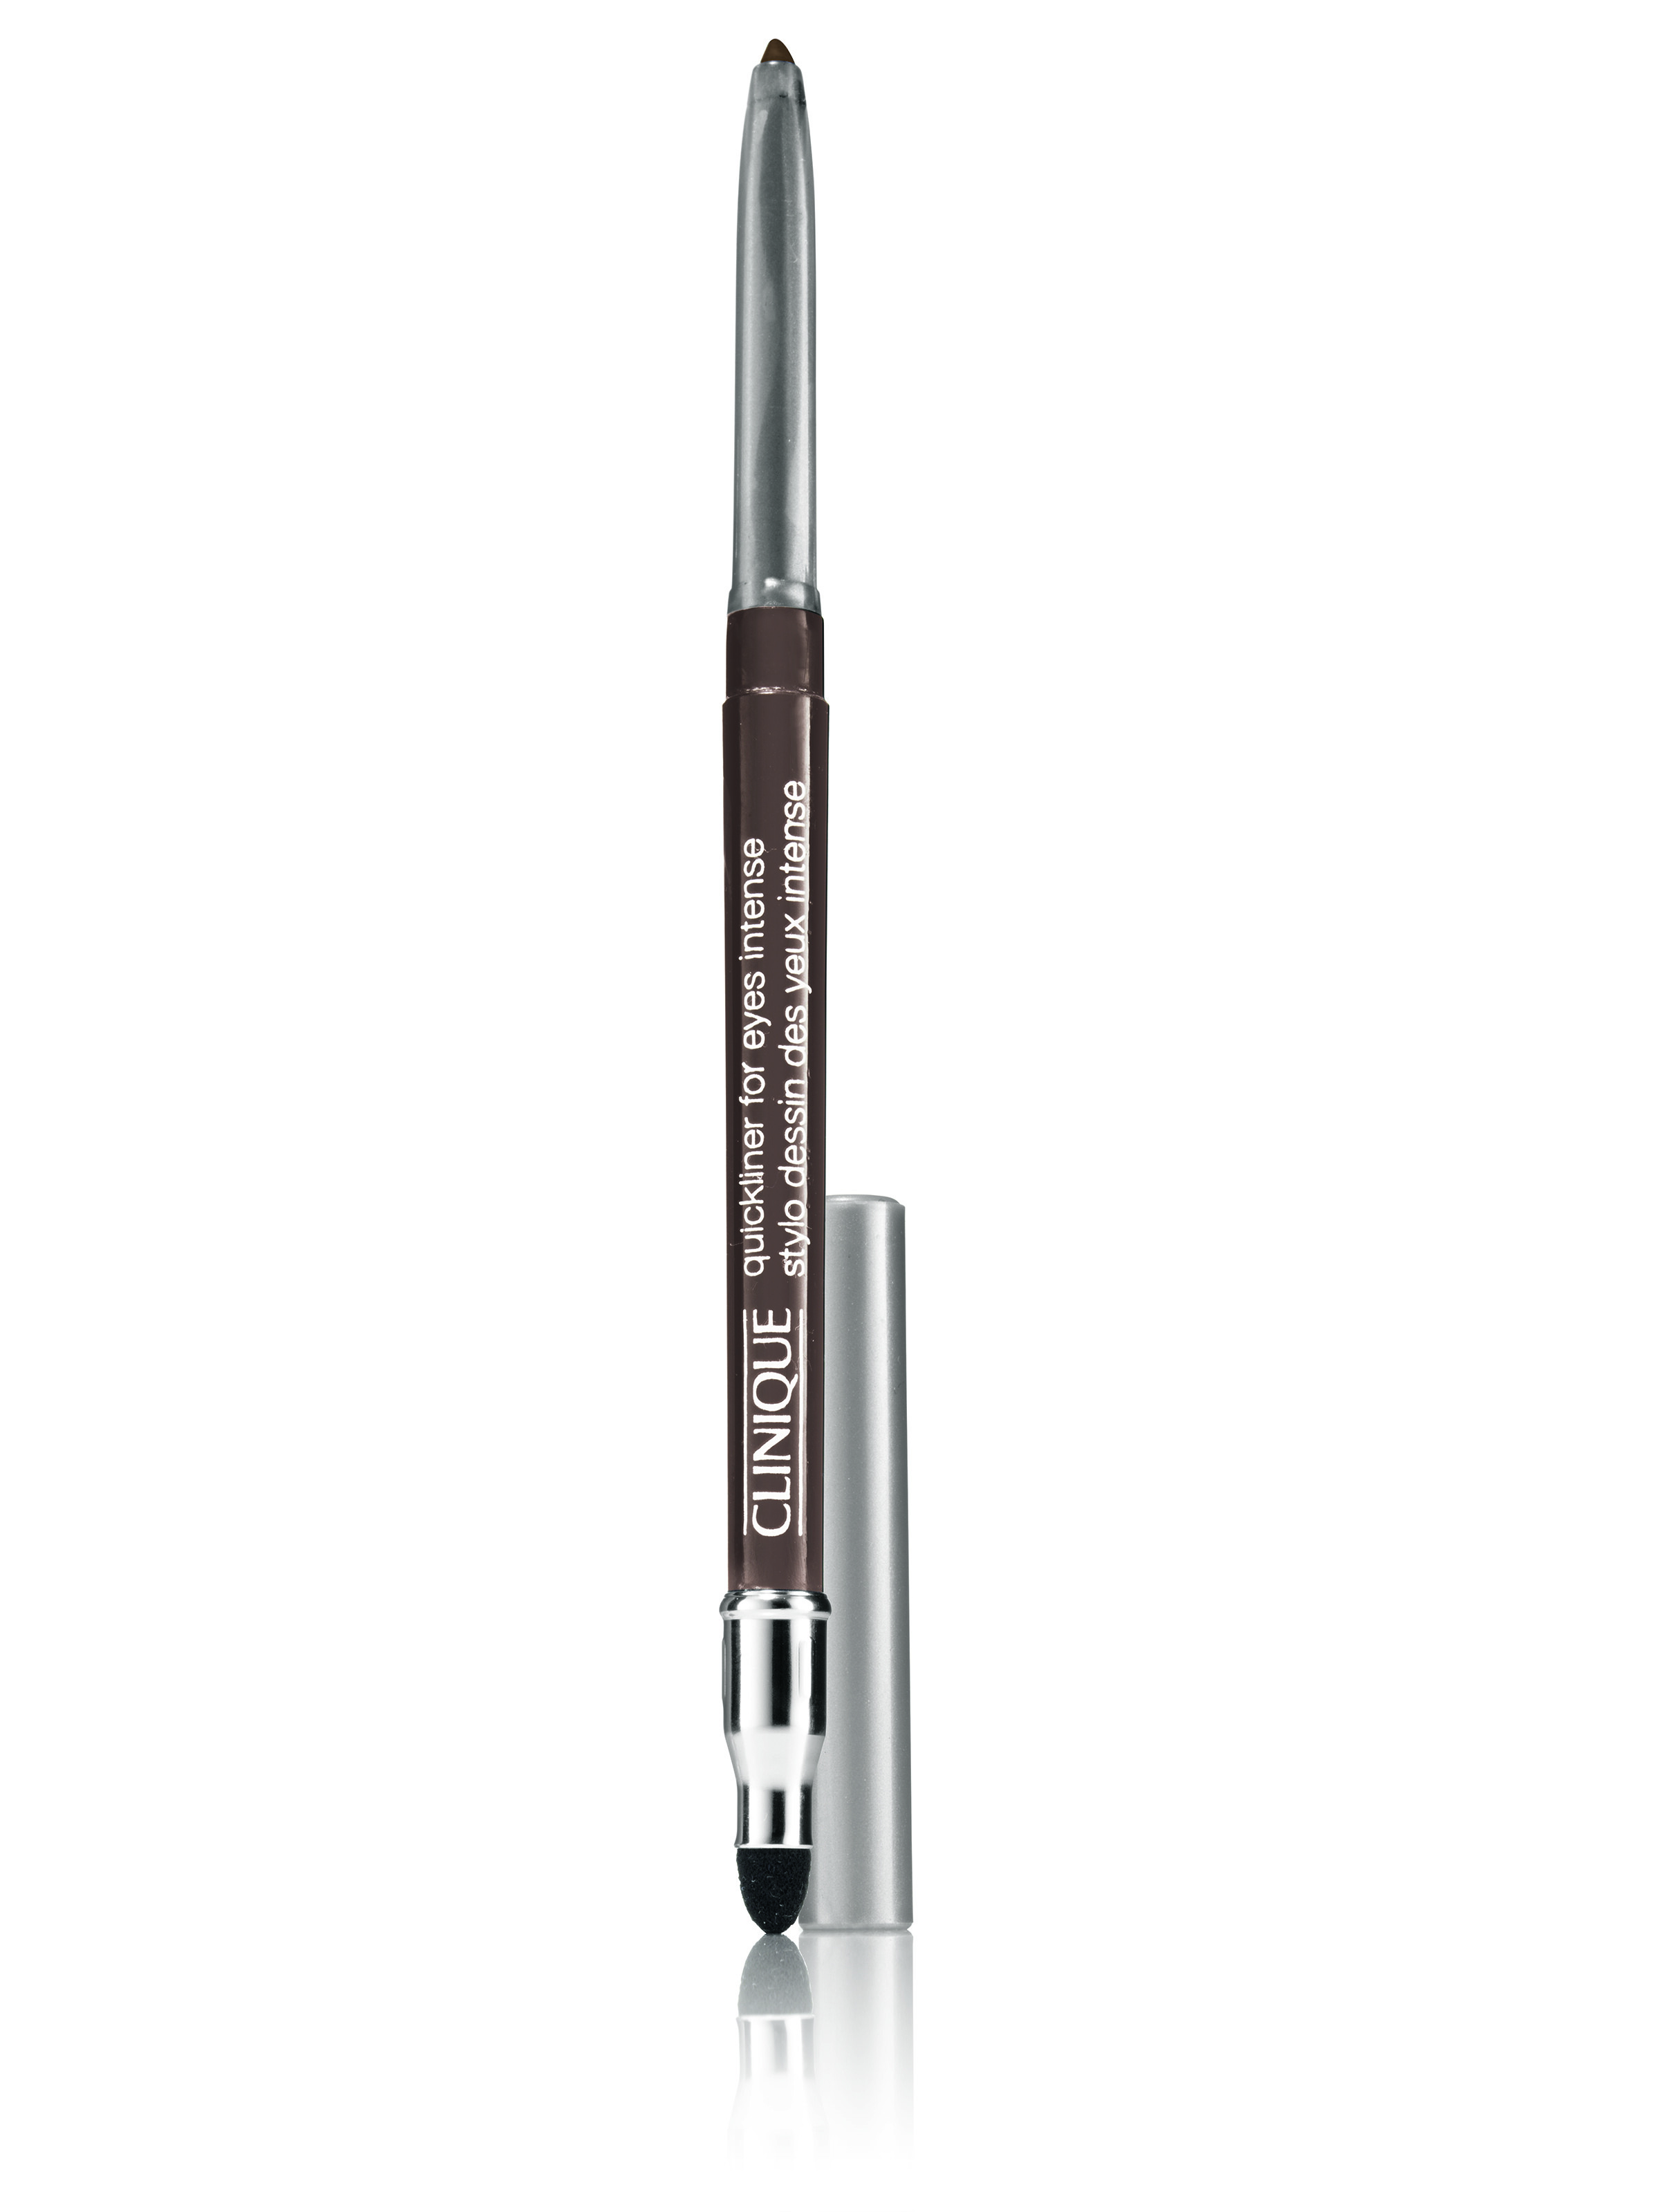 Clinique Quickliner for Eyes Intense Intense Chocolate